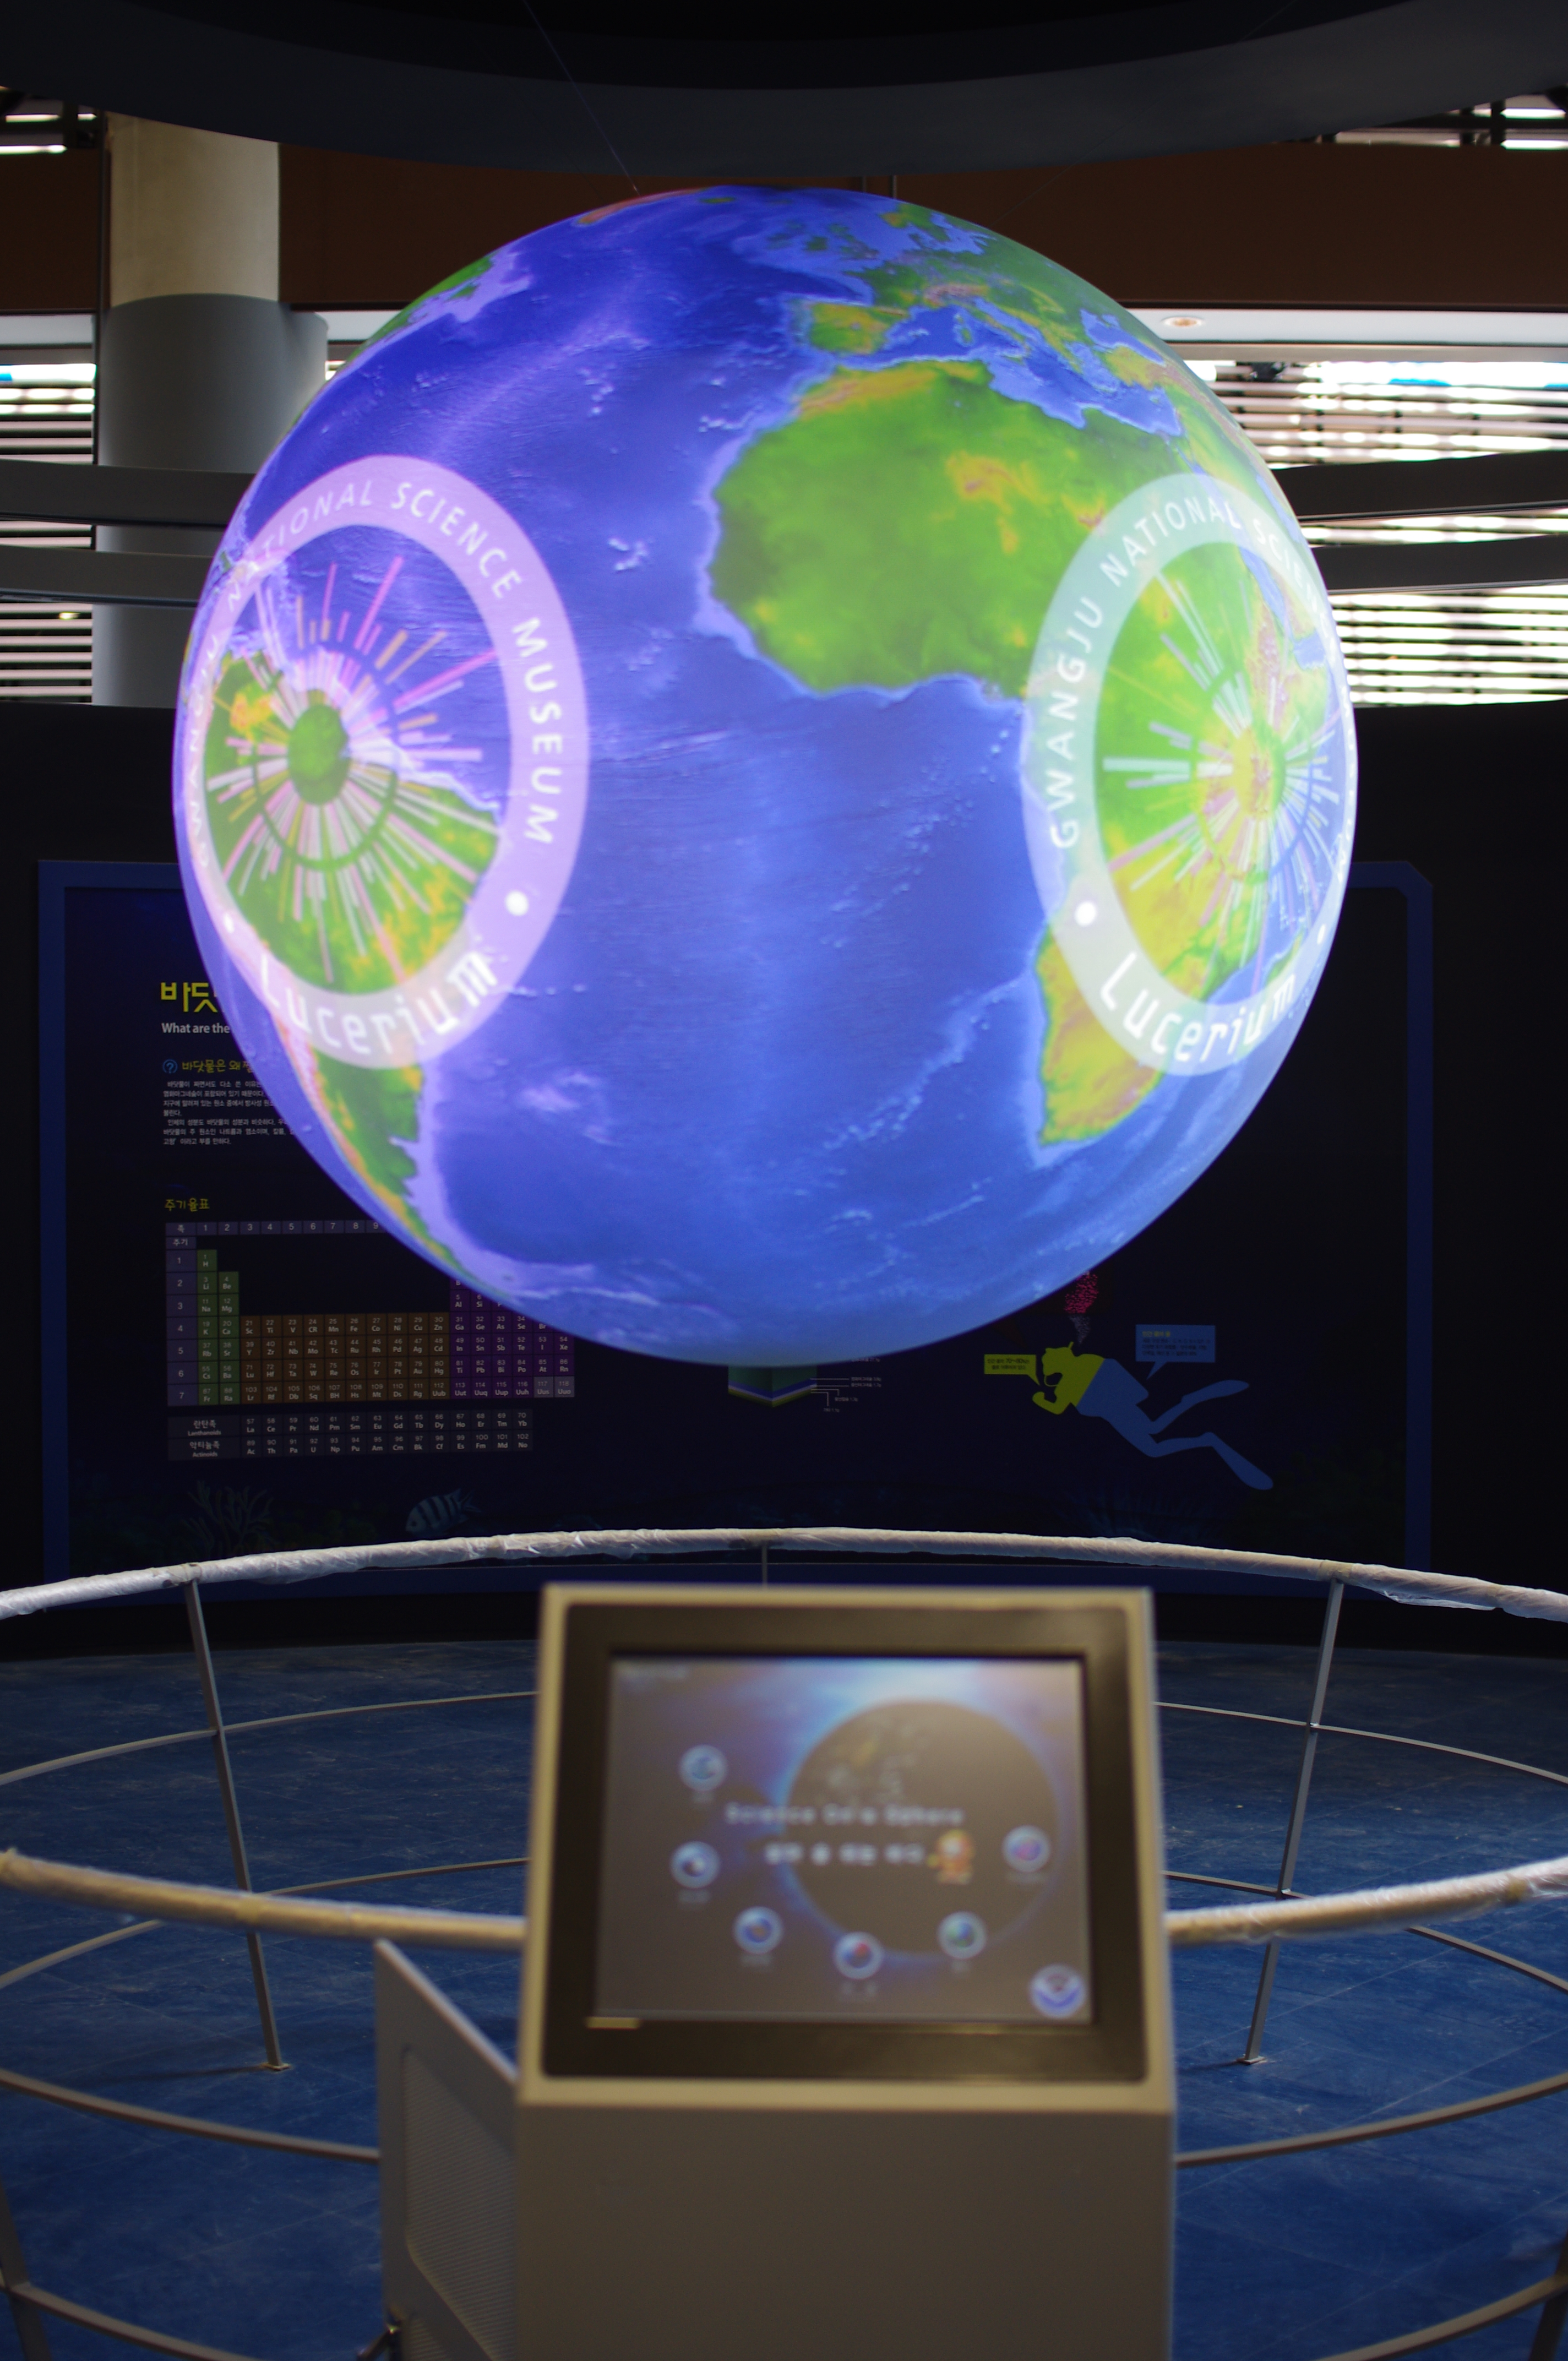 Science On a Sphere displays the Gwangju National Science Museum logo atop an image of Earth. A touchscreen for controlling the Sphere is visible in the foregorund